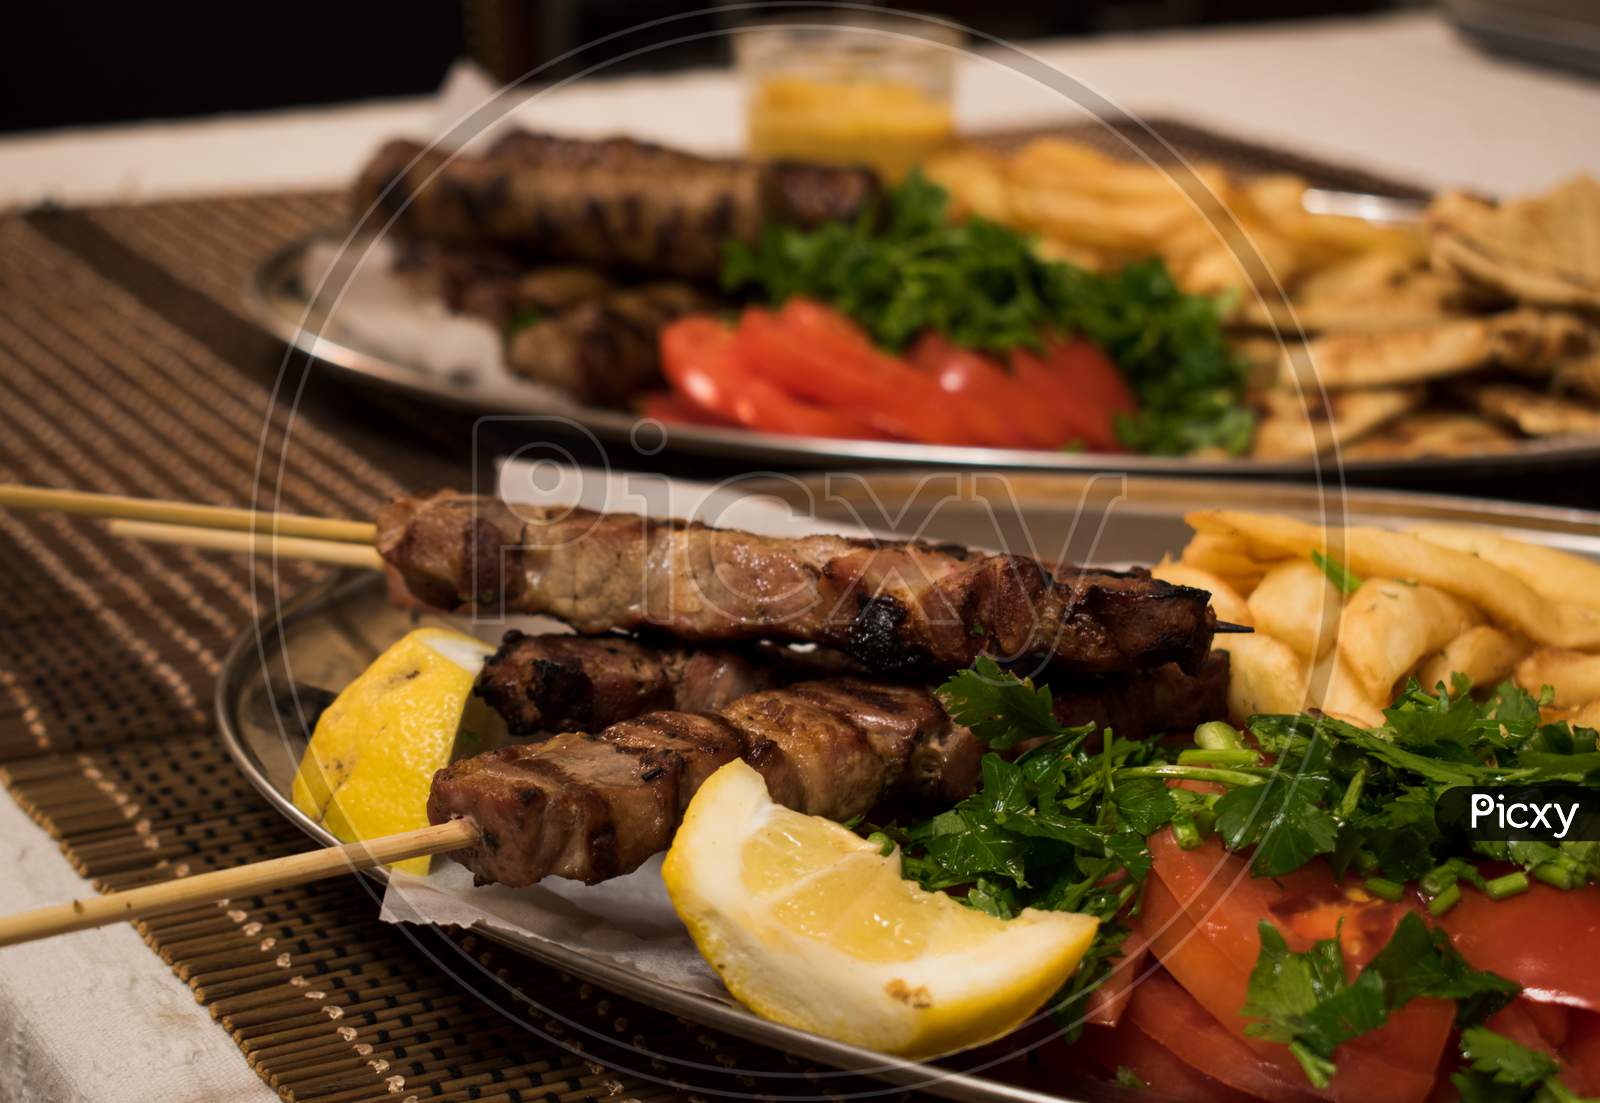 Fried Souvlaki, Traditional Lamp Kebab With Fresh Salad And Sauce In Plate On Wicker Surface.